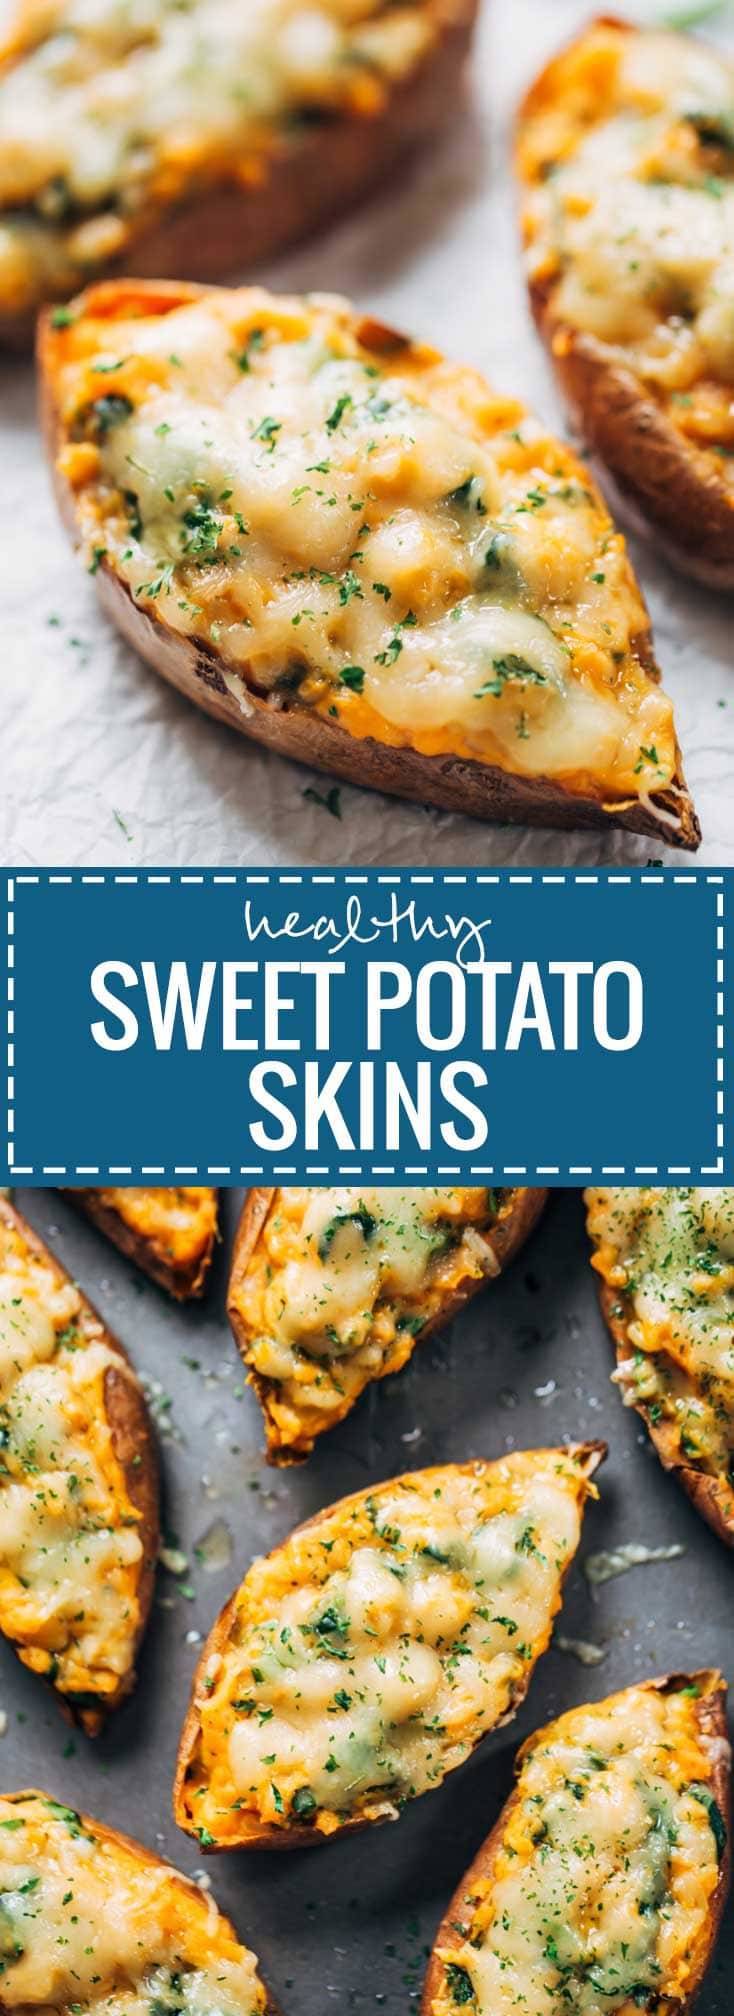 Healthy Sweet Potato Skins - a vegetarian recipe featuring sweet potatoes, spinach, and chickpeas! a MUST TRY for sweet potato lovers. | pinchofyum.com